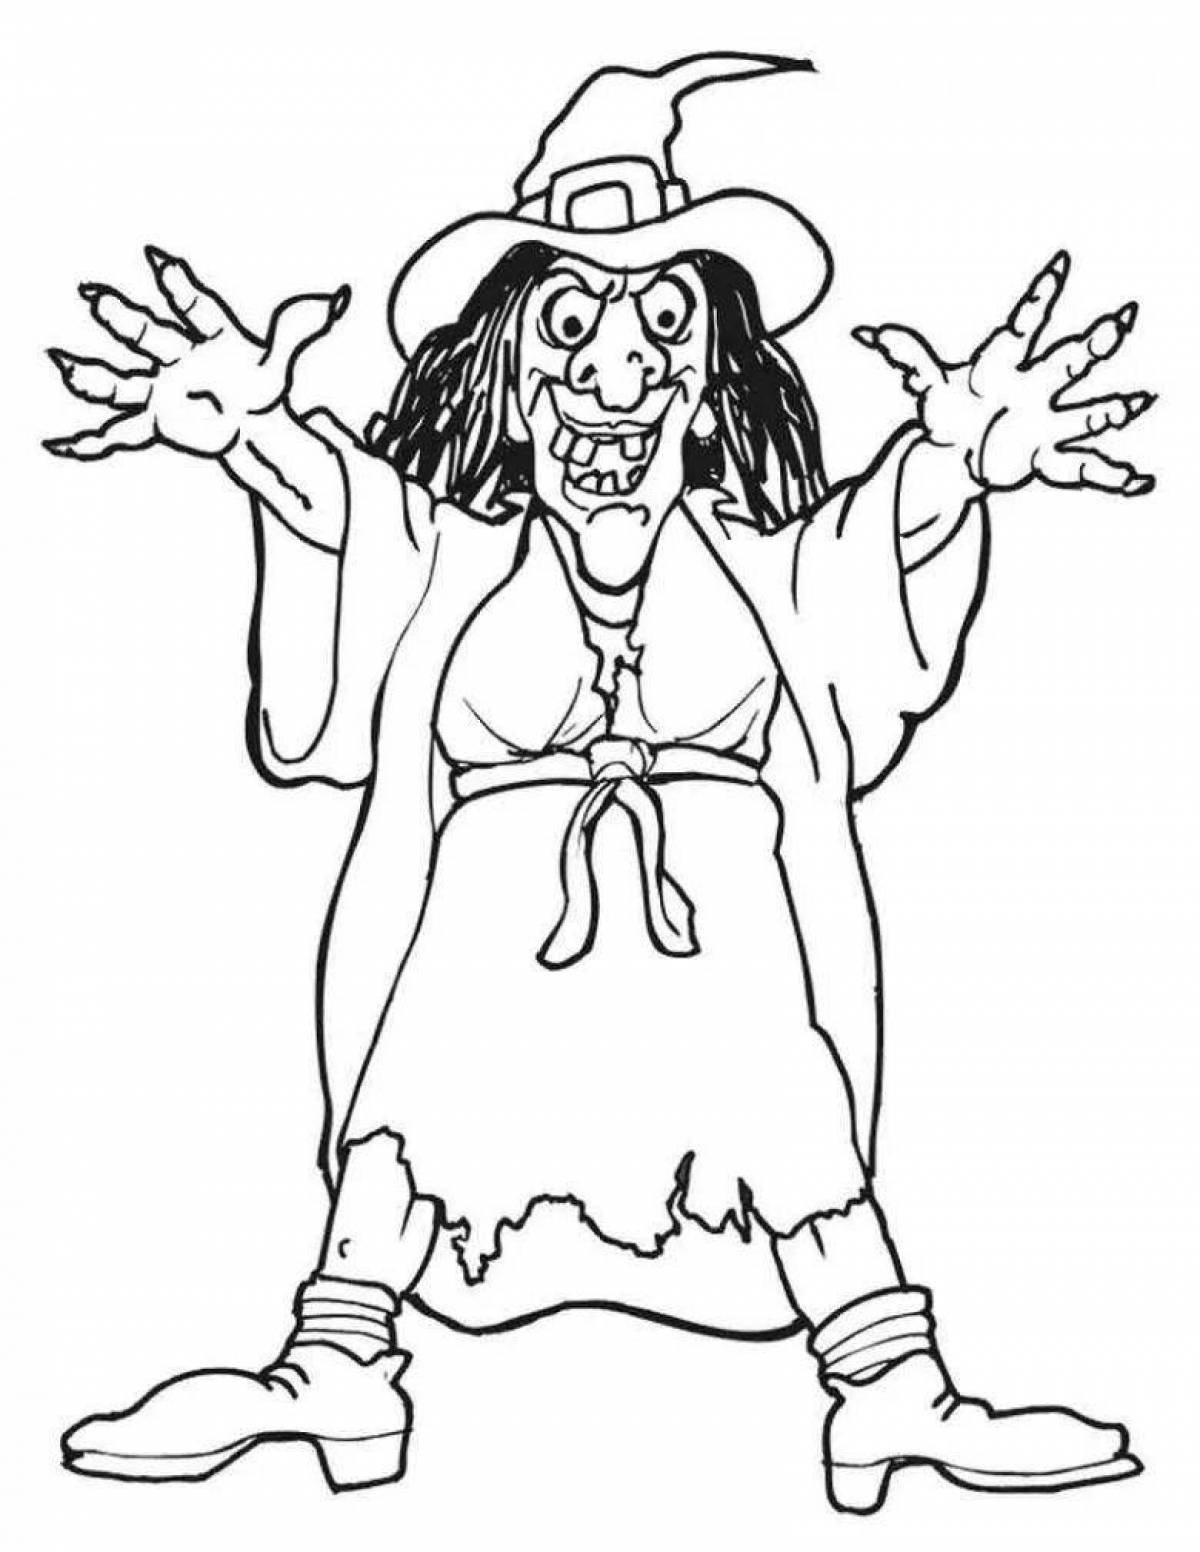 Terrible witch coloring book